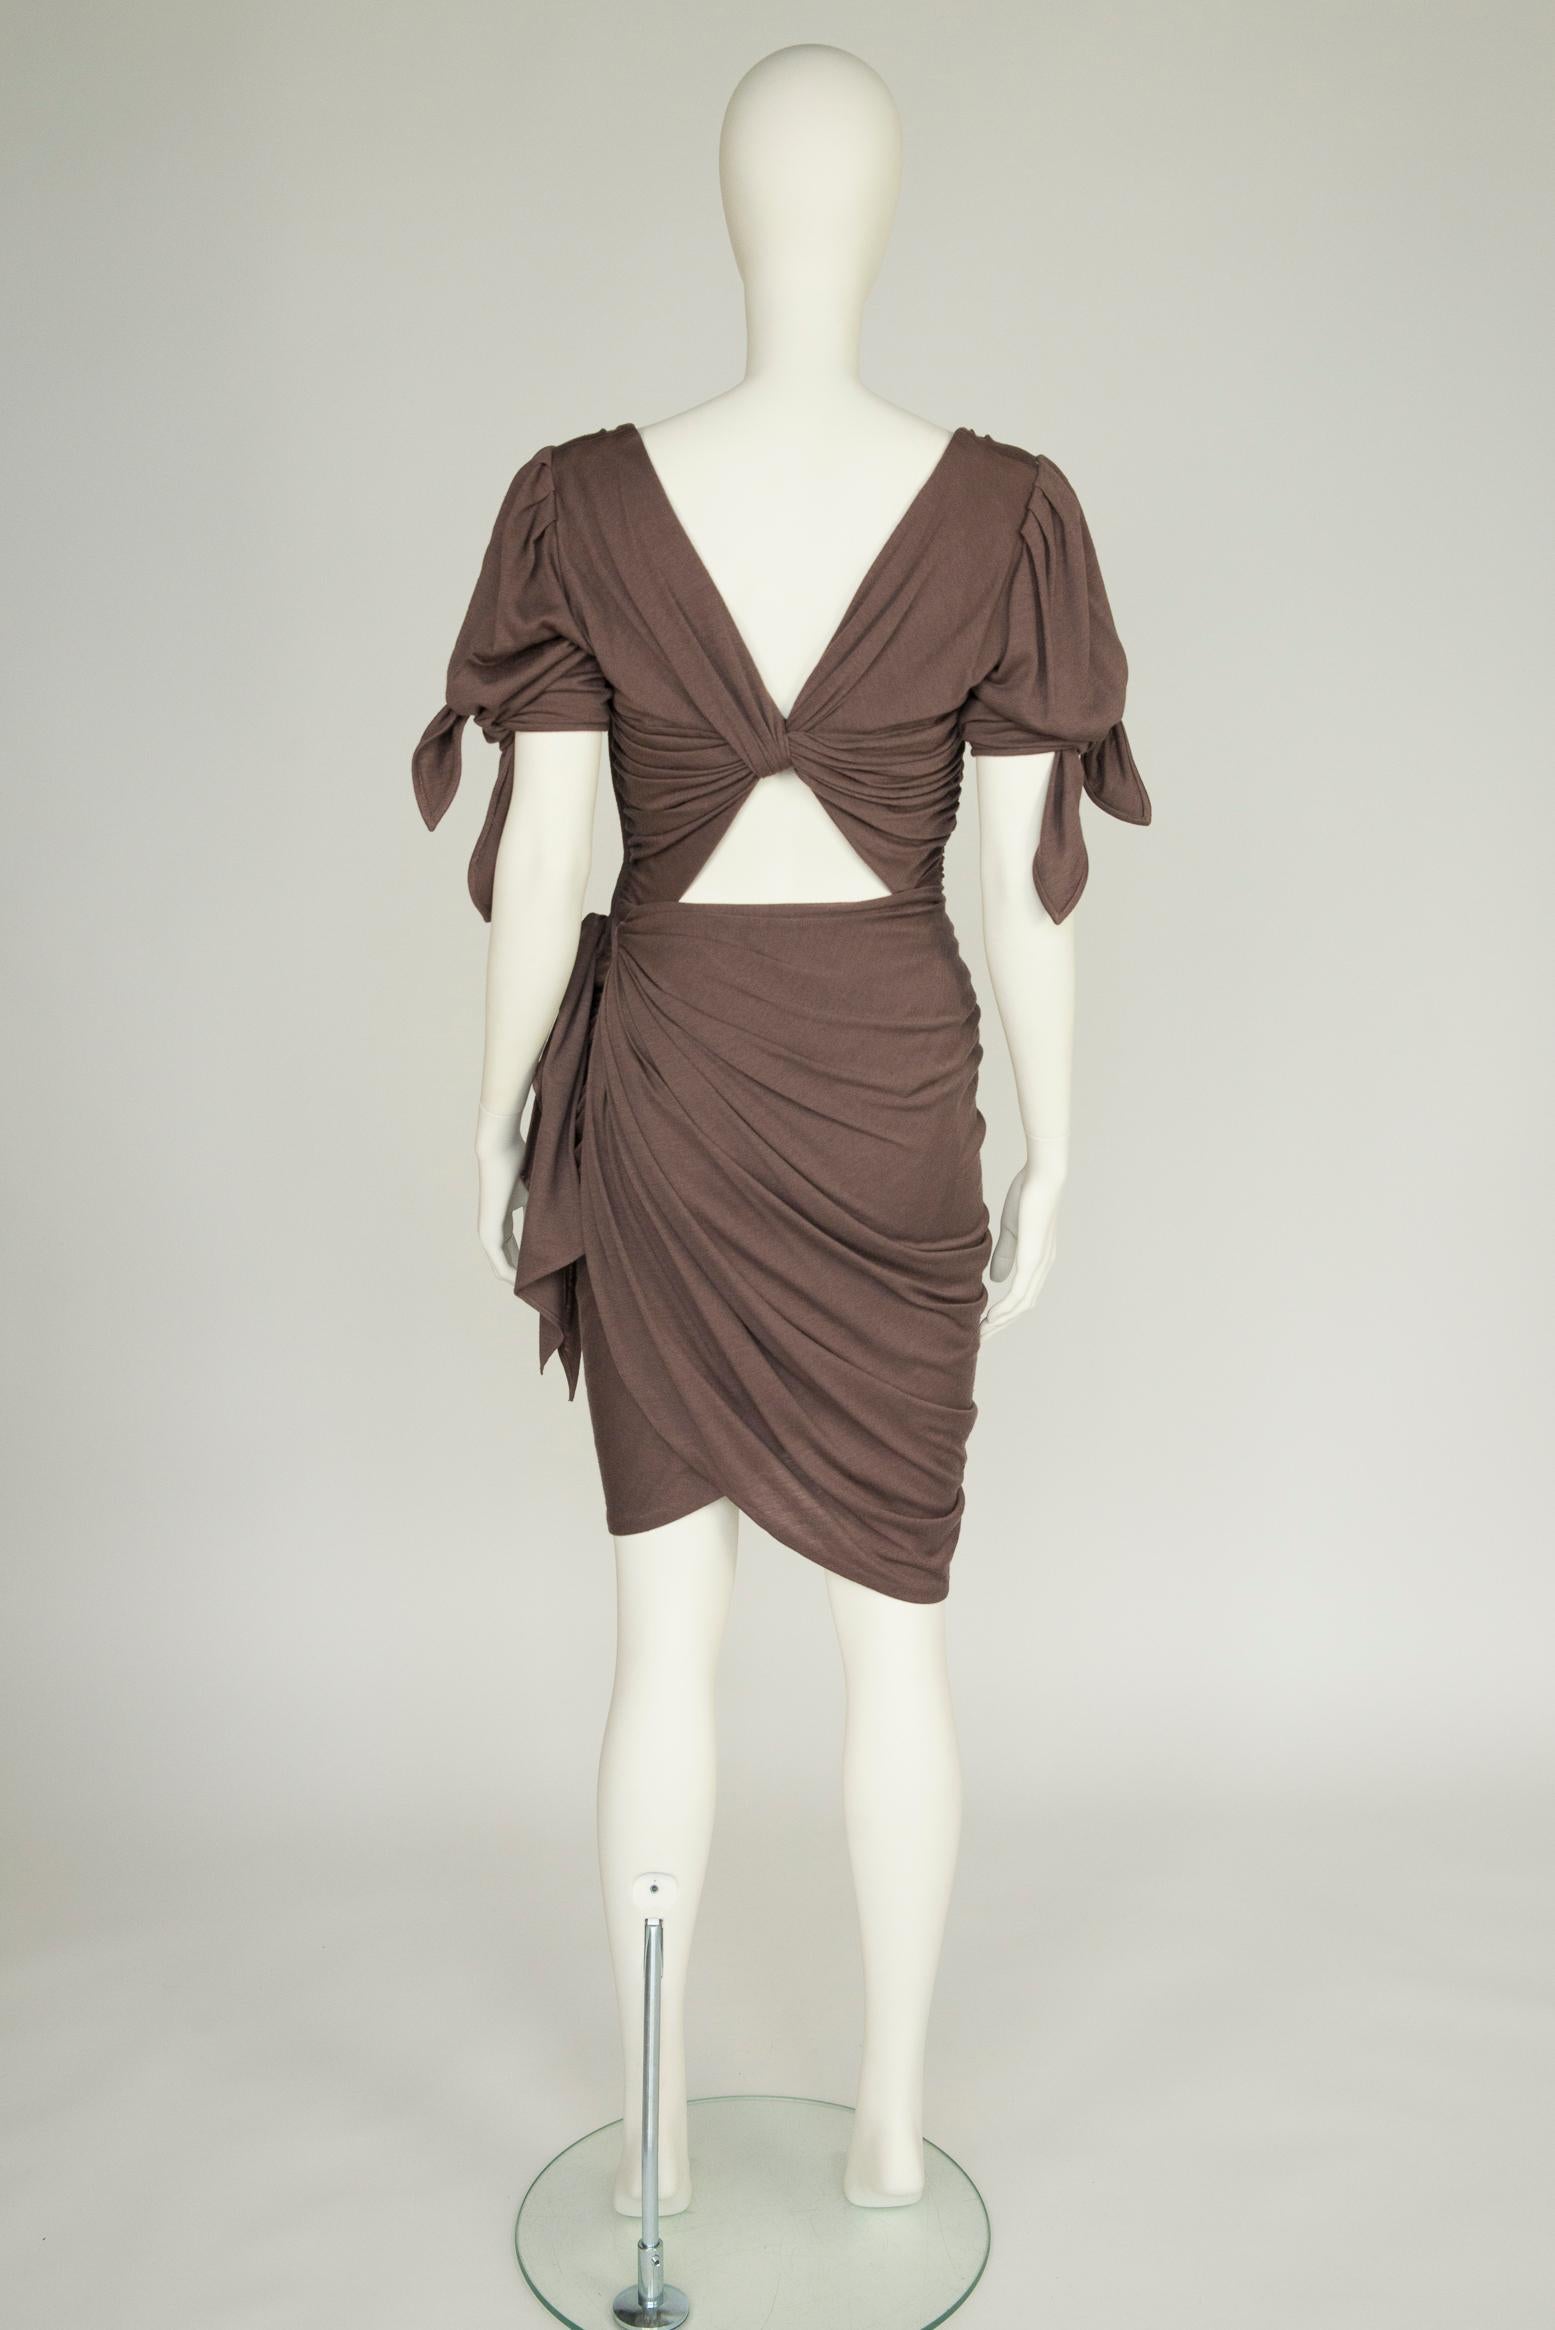 Emanuel Ungaro Draped Knotted Cut-Out Cocktail Dress, Circa 1985 For Sale 4